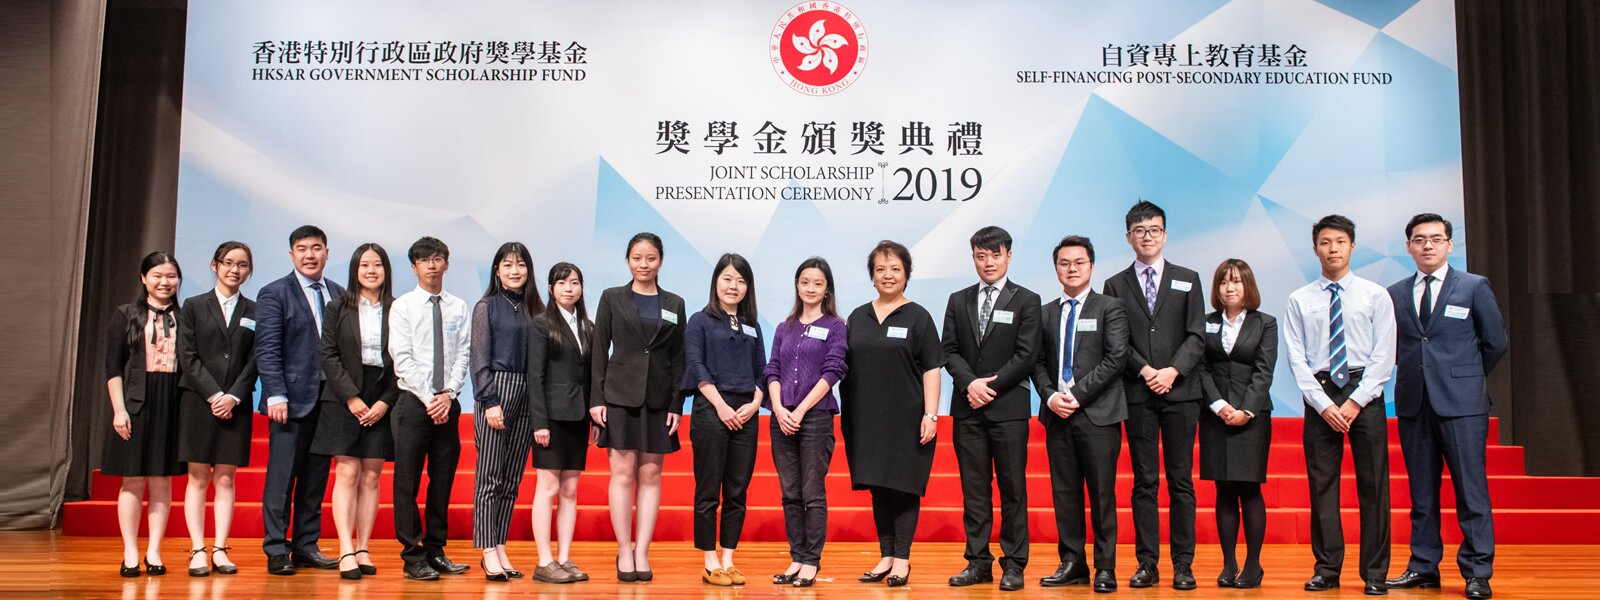 280 EdUHK Students Receive Government Scholarships or Awards